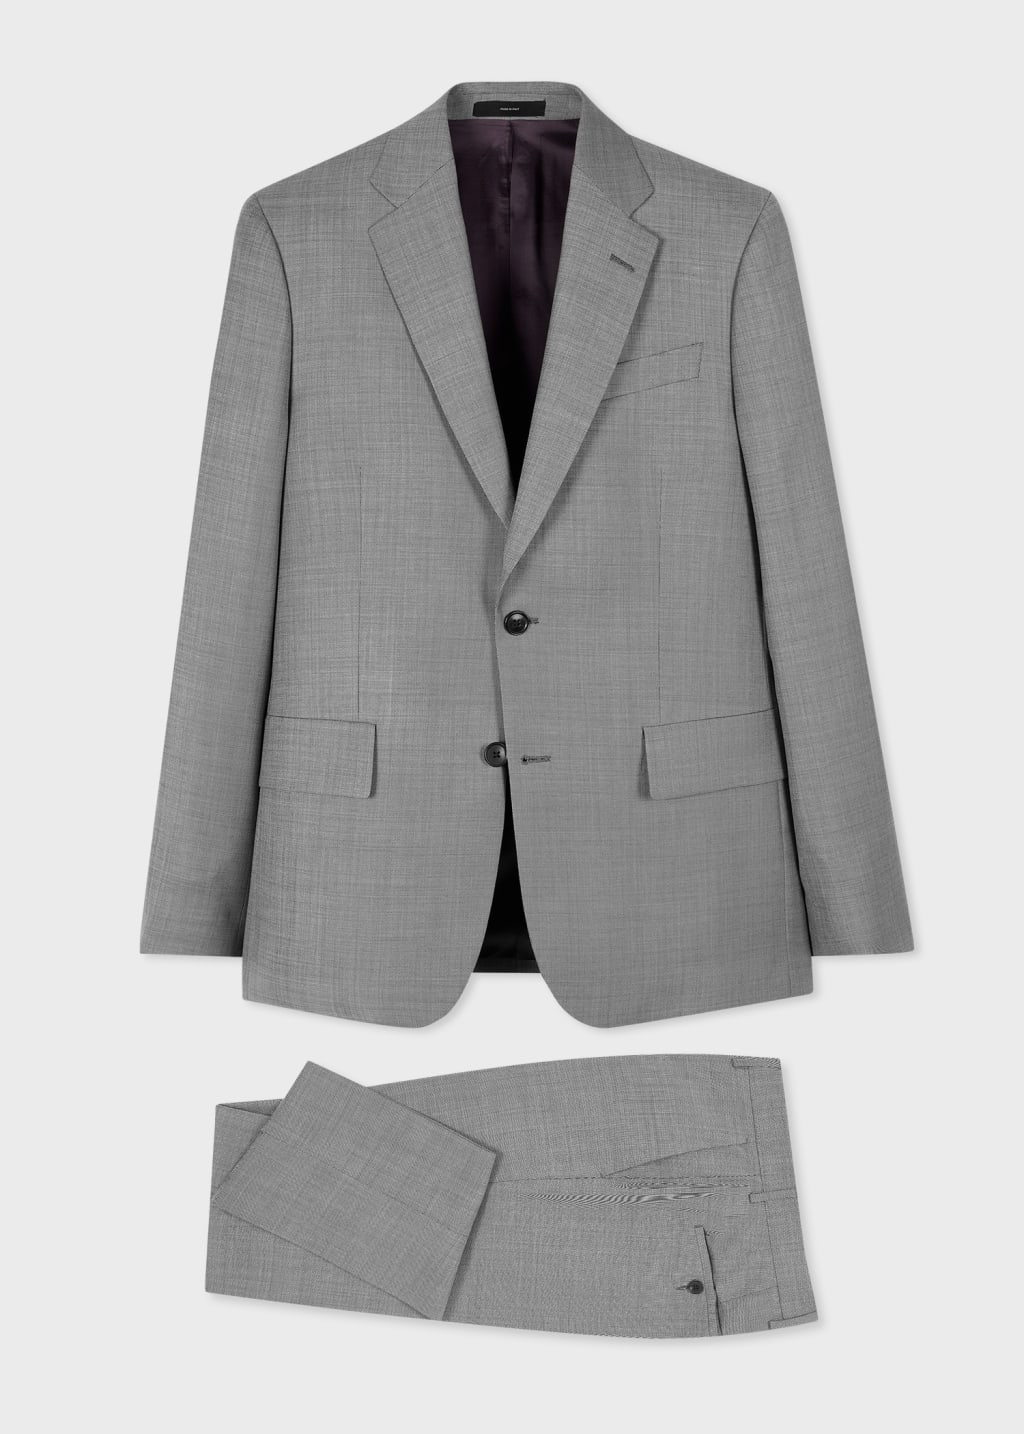 Product view - The Brierley - Light Grey Sharkskin Wool Suit Paul Smith